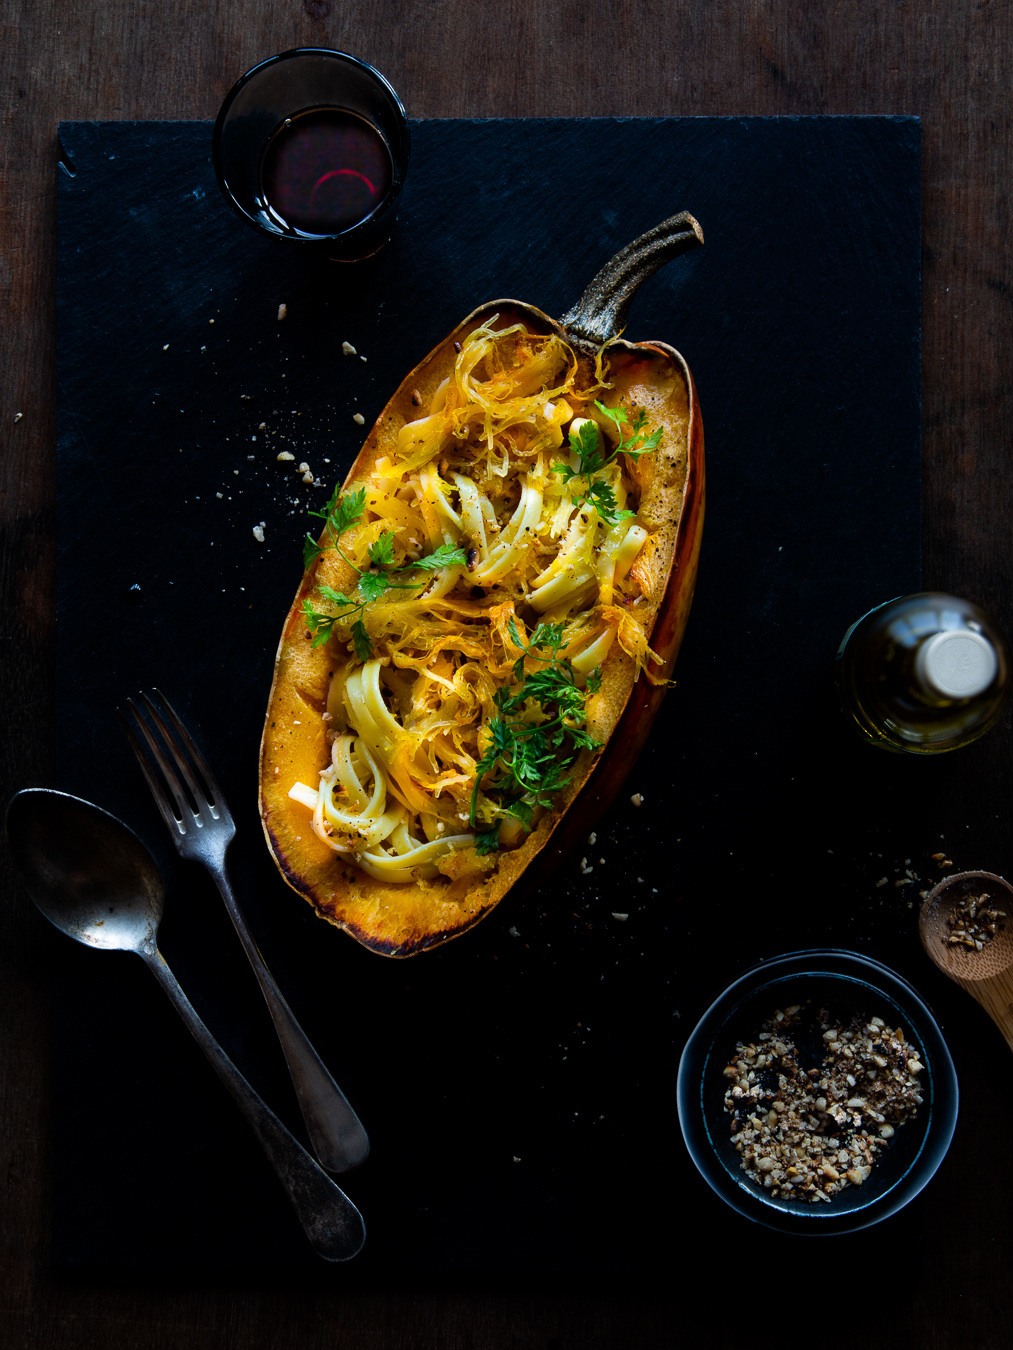 Spaghetti Squash with Truffled Pasta after a Winter’s Walk